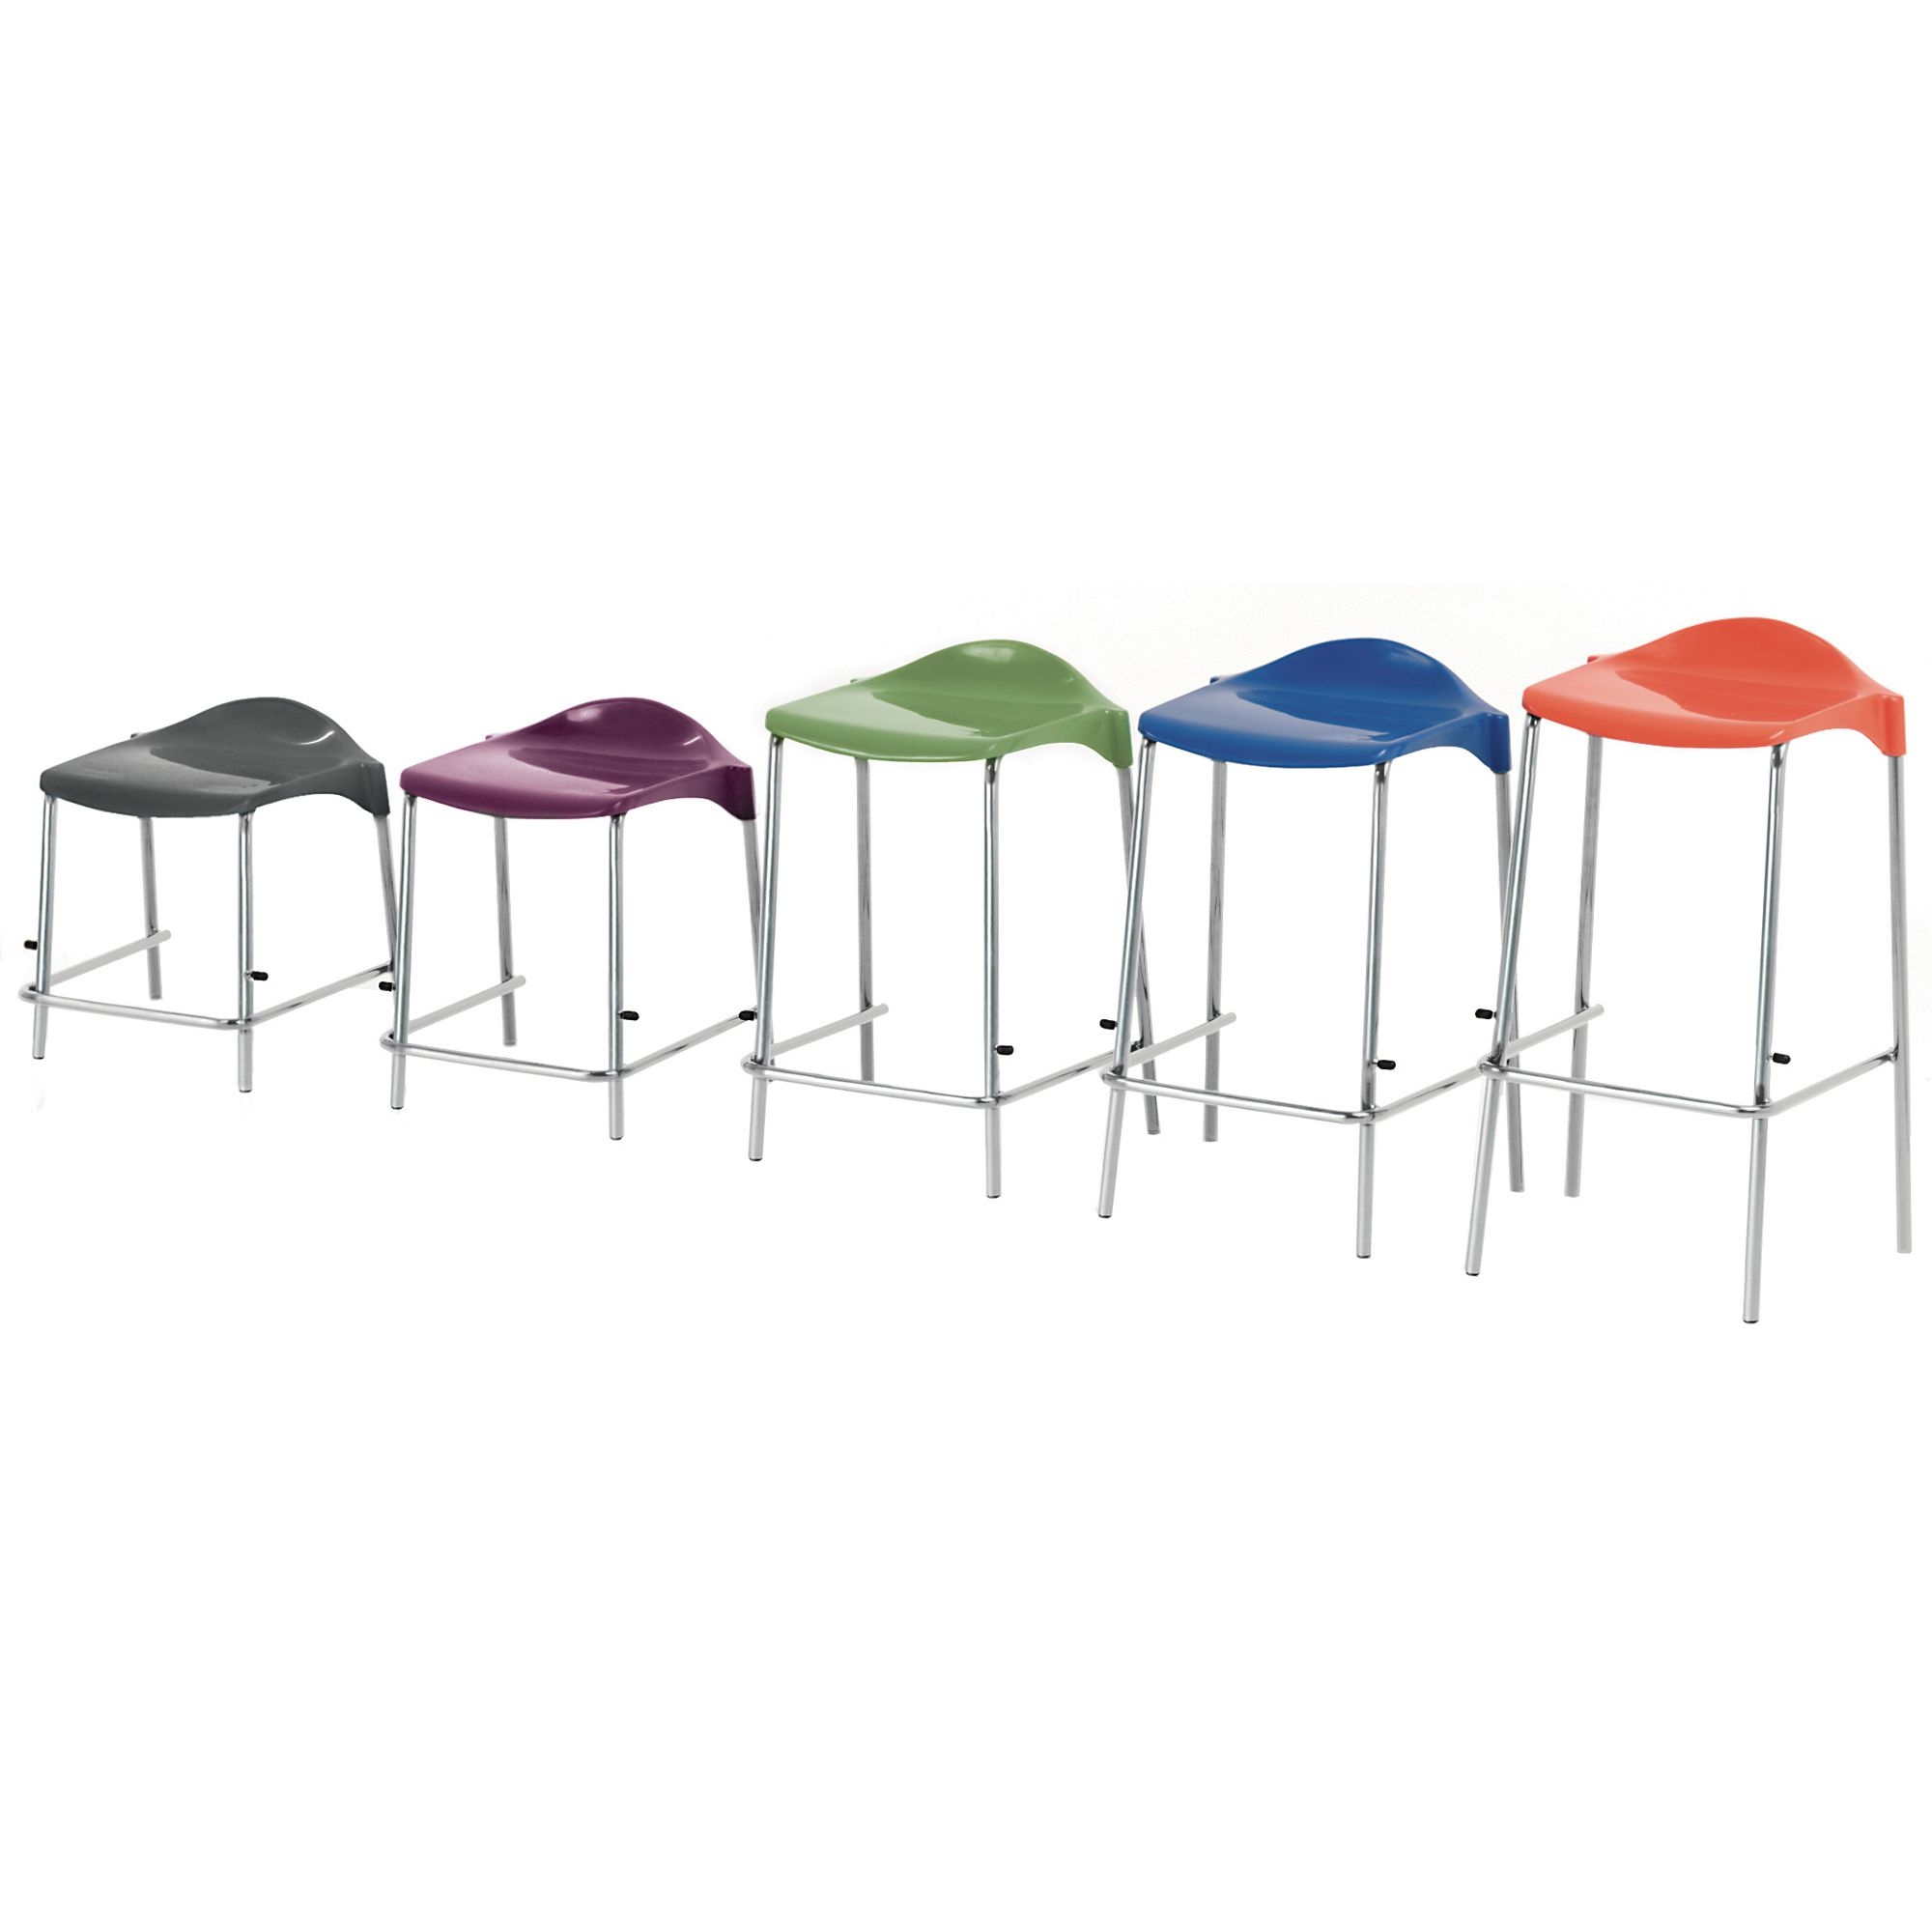 WSM four Legged Stool - Seat height: 610mm - Lime